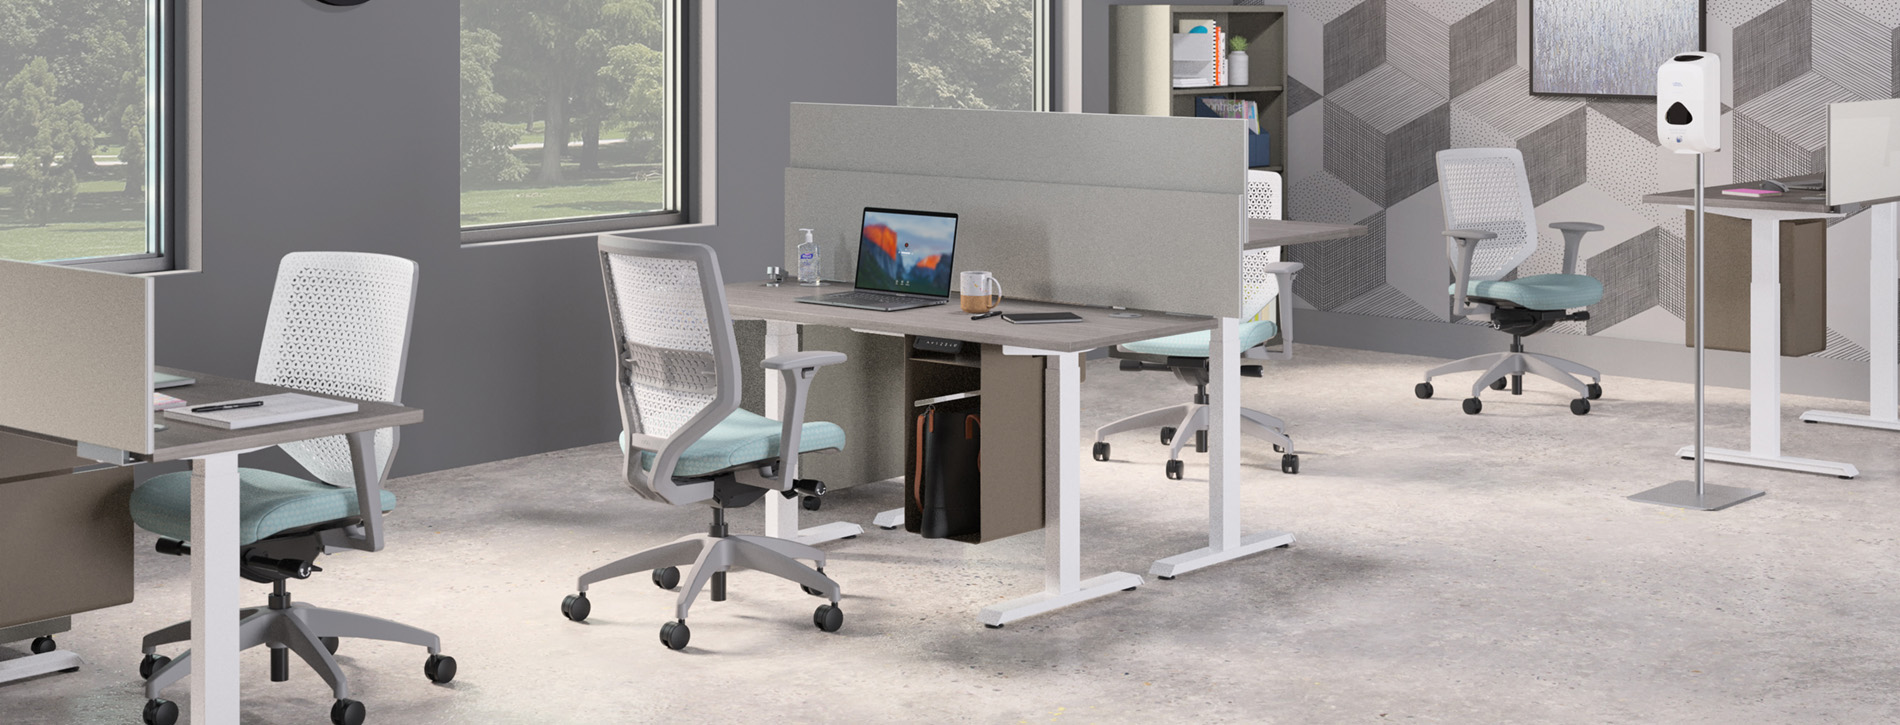 Office space with chairs